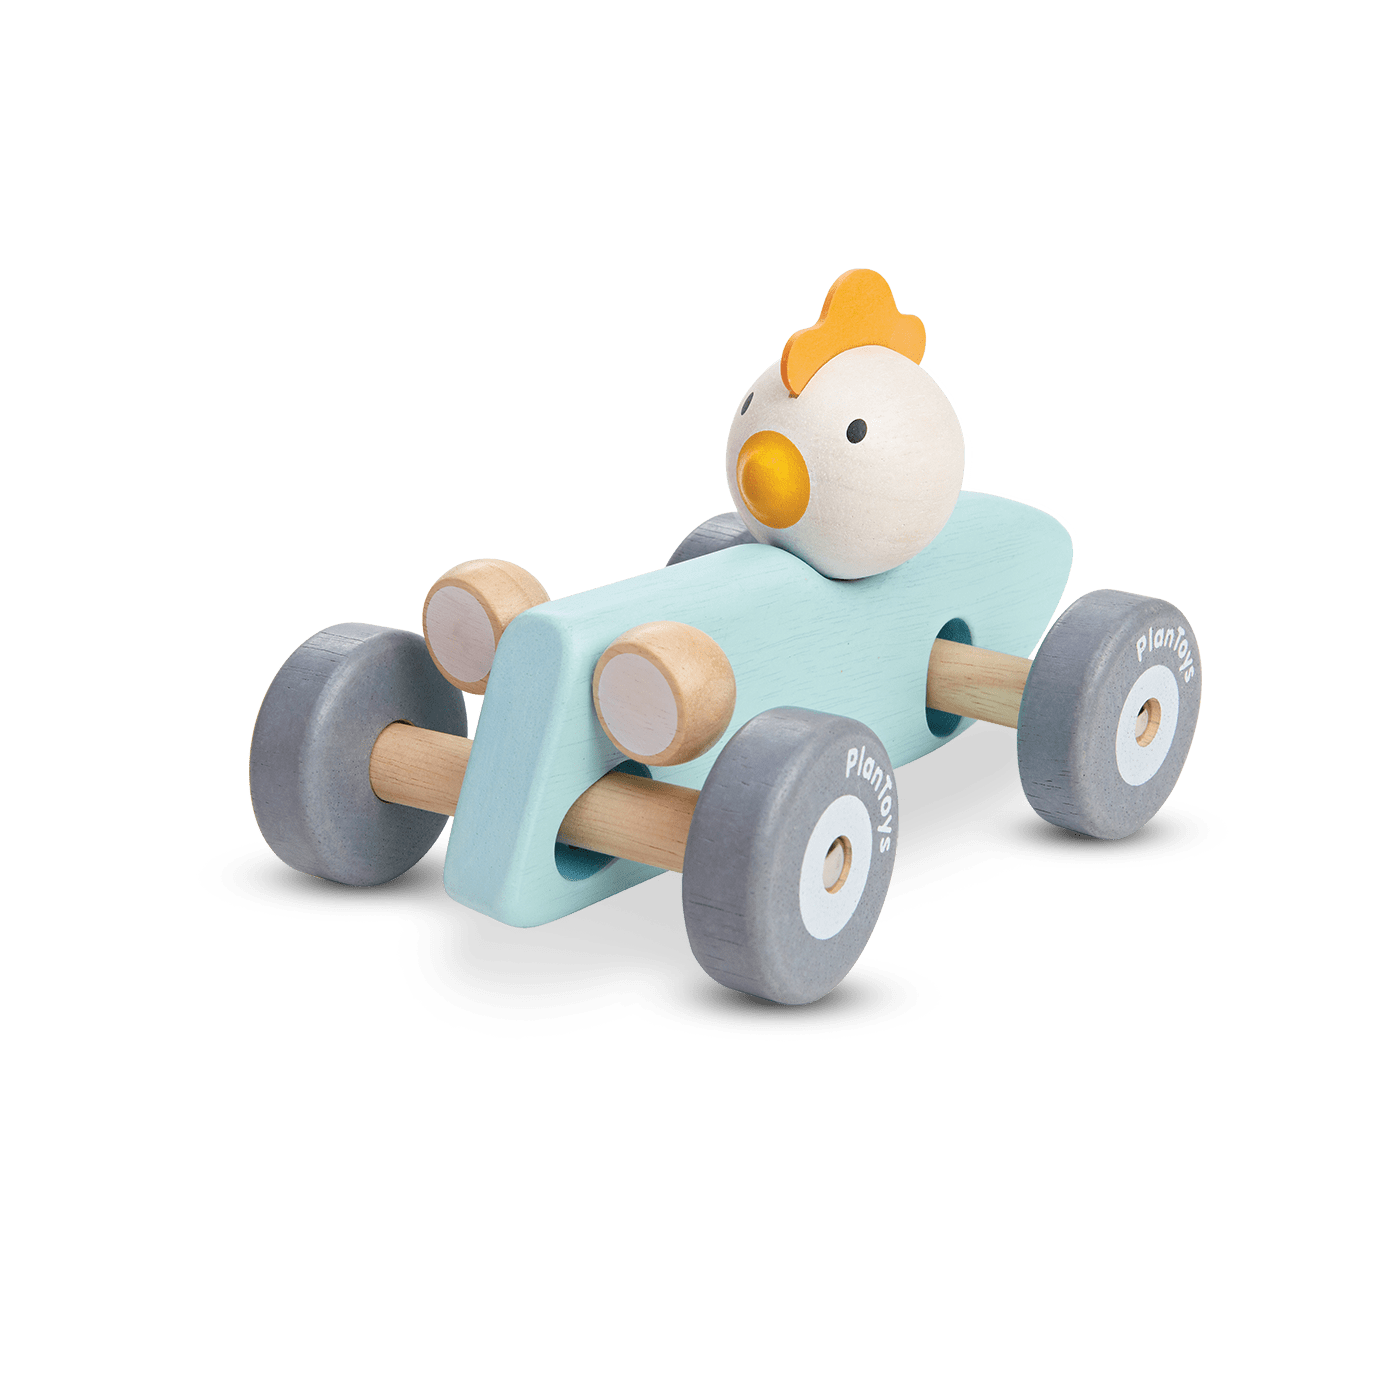 5716_PlanToys_CHICKEN_RACING_CAR_Active_Play_Imagination_Fine_Motor_Coordination_Language_and_Communications_12m_Wooden_toys_Education_toys_Safety_Toys_Non-toxic_0